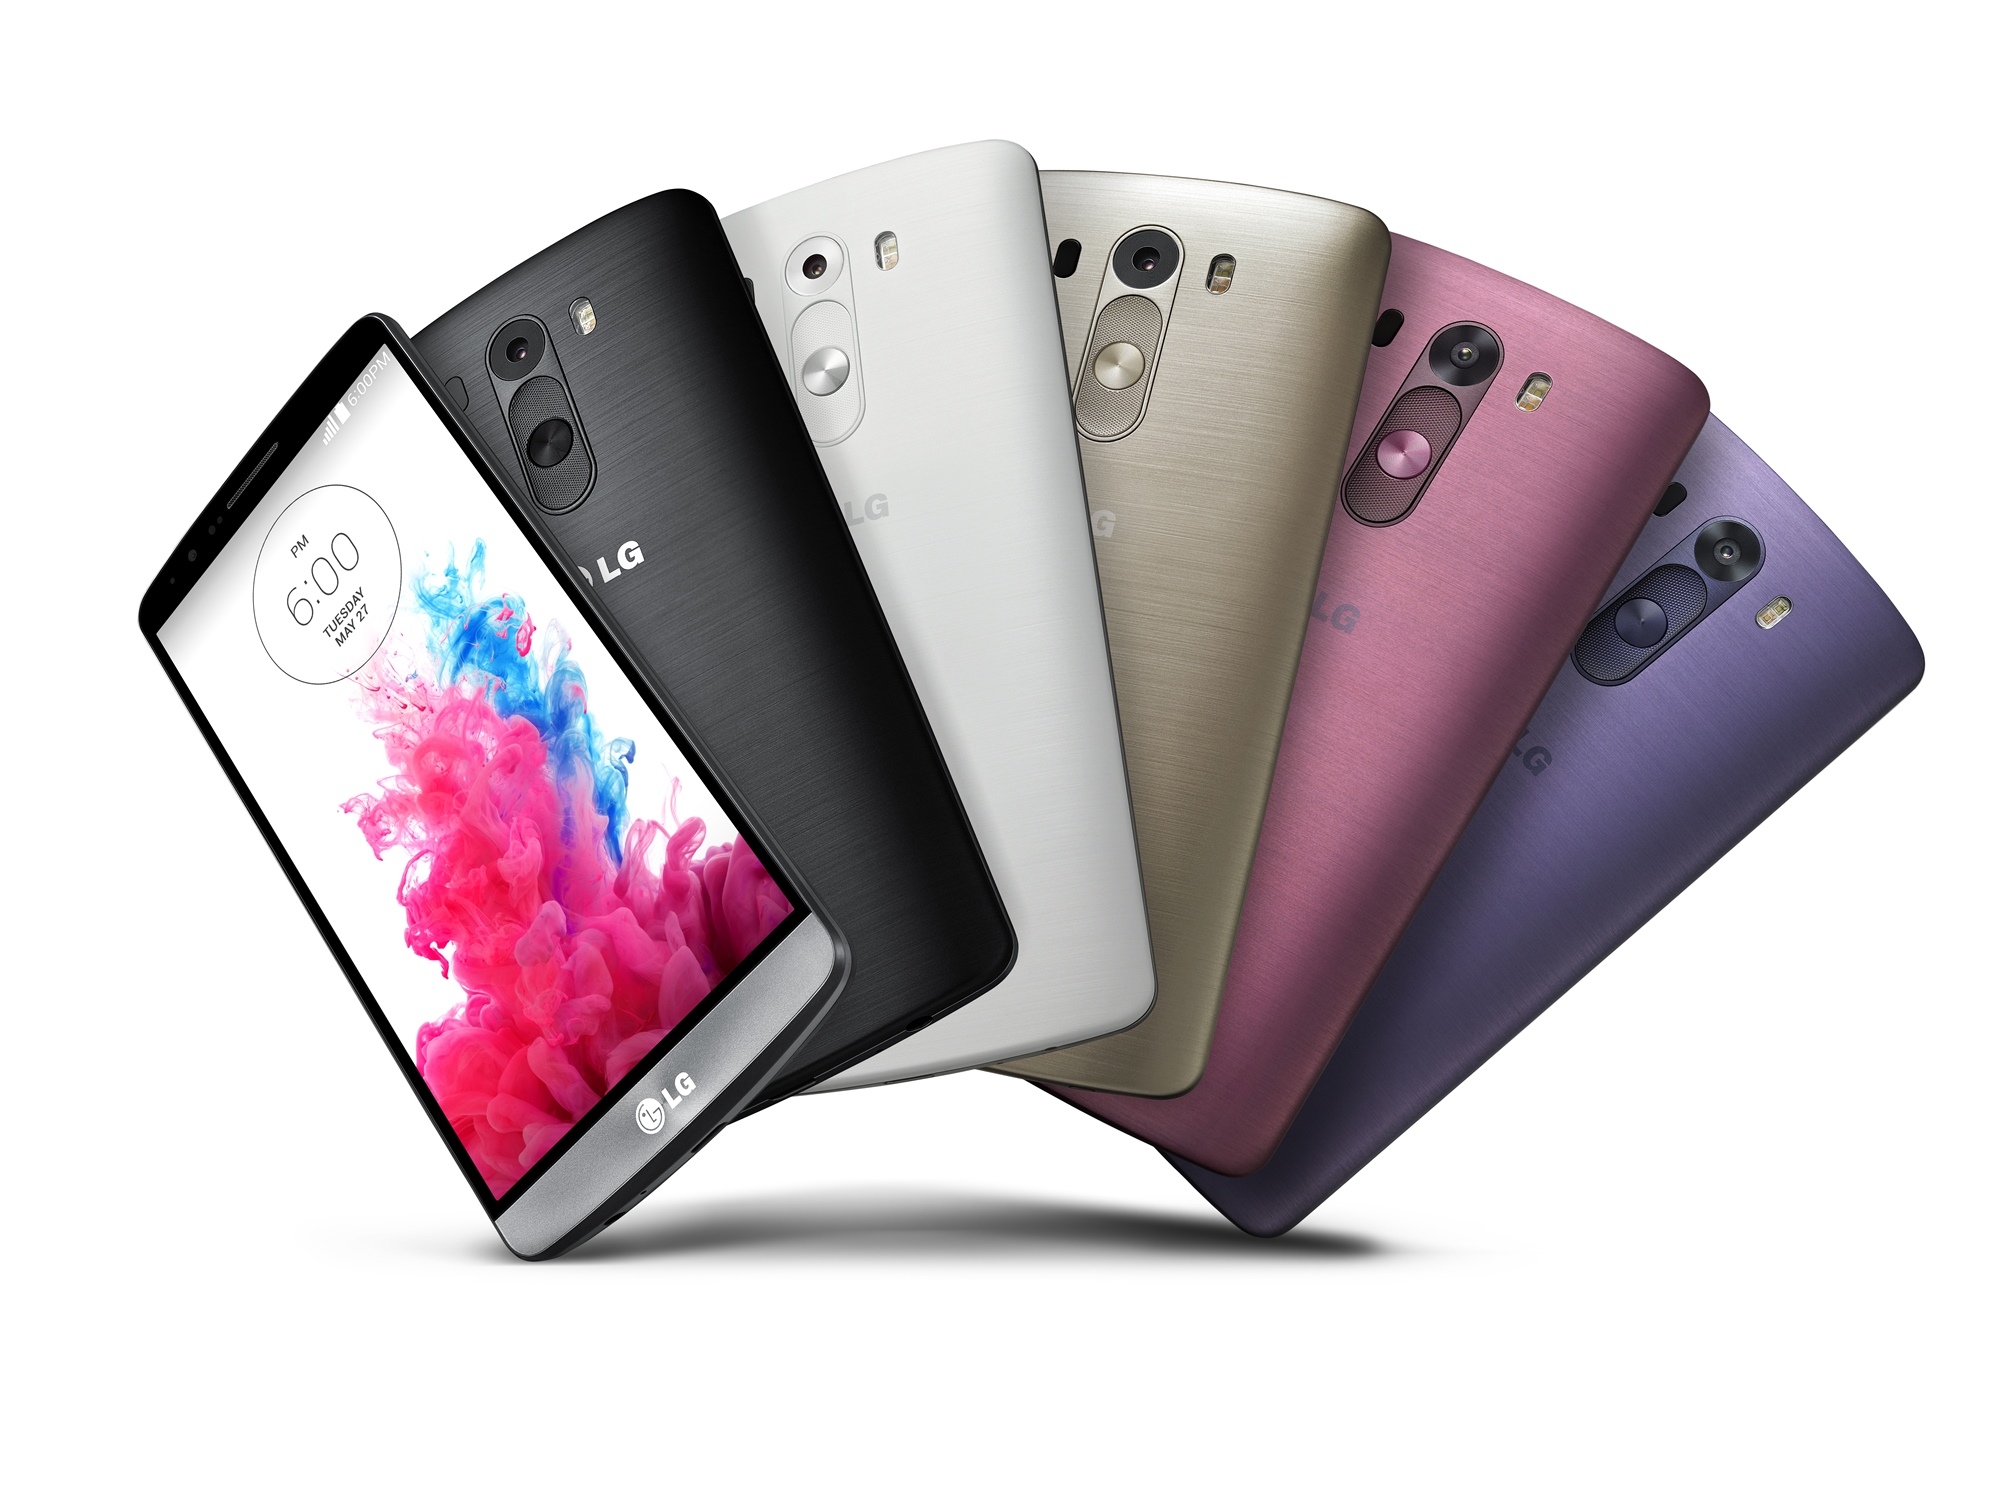 The Lg G3 Is First Smartphone From Any Major Oem To Sport A Quad